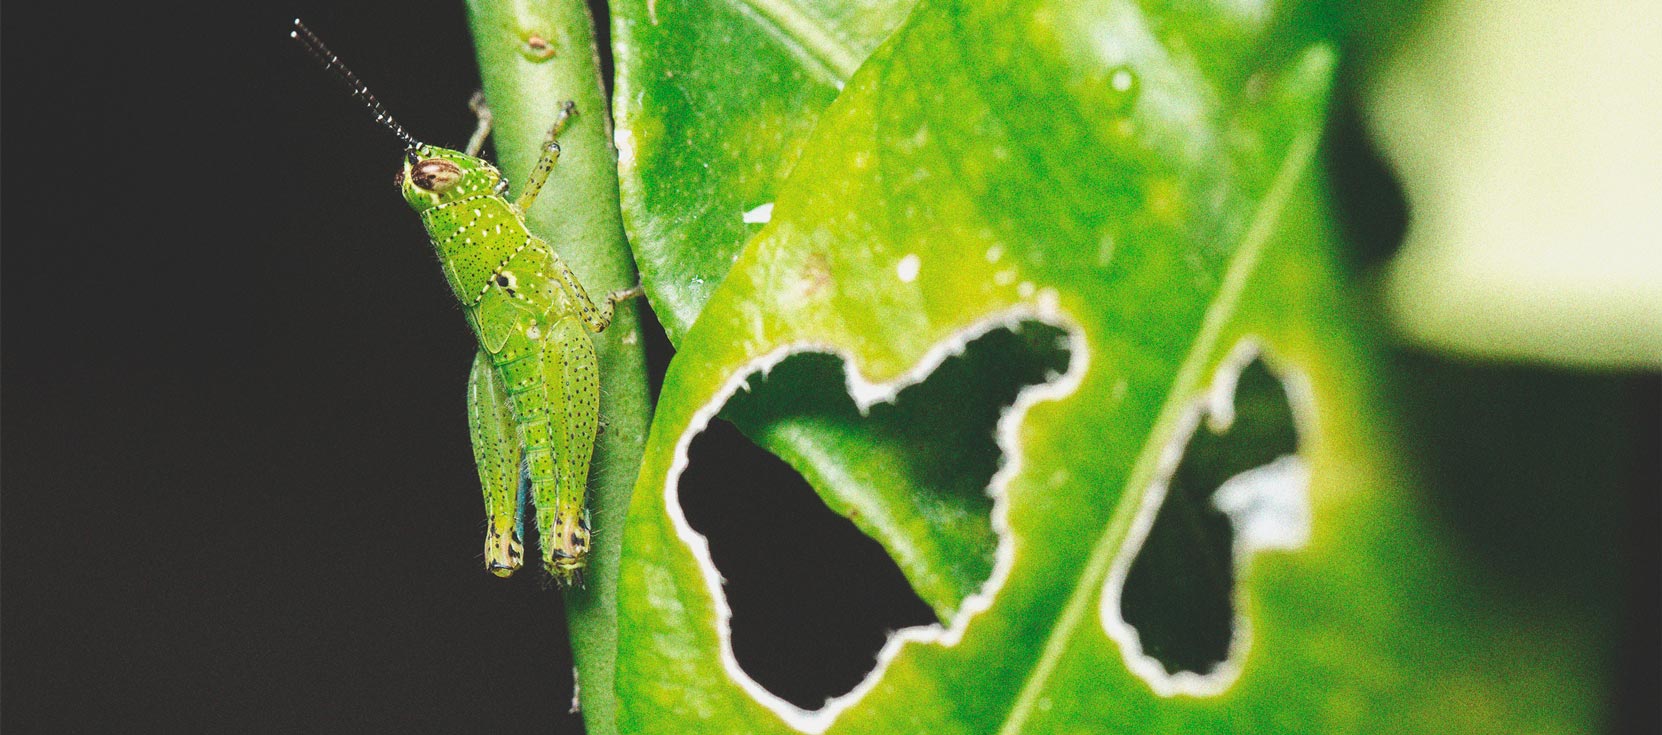 Signs of Cricket Damage on Cannabis Plants